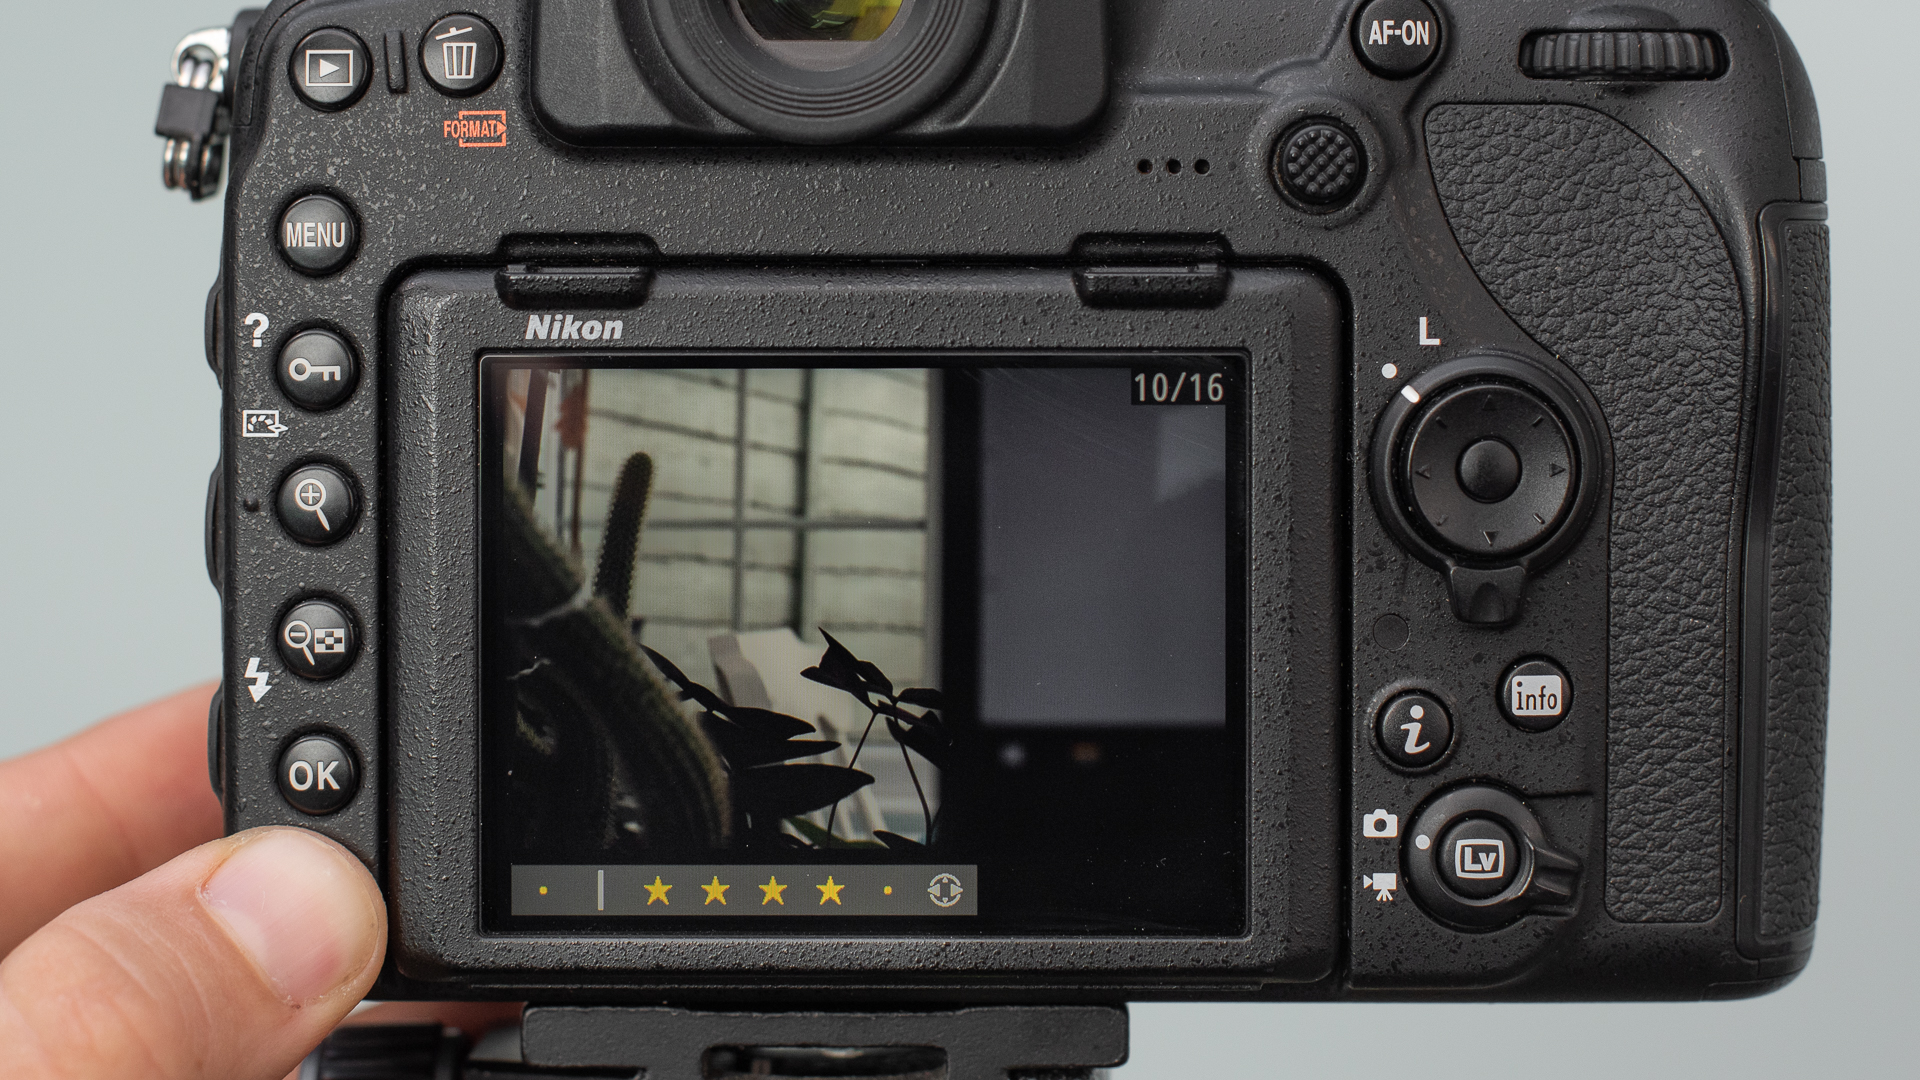 Image shows the Nikon D850 viewfinder screen